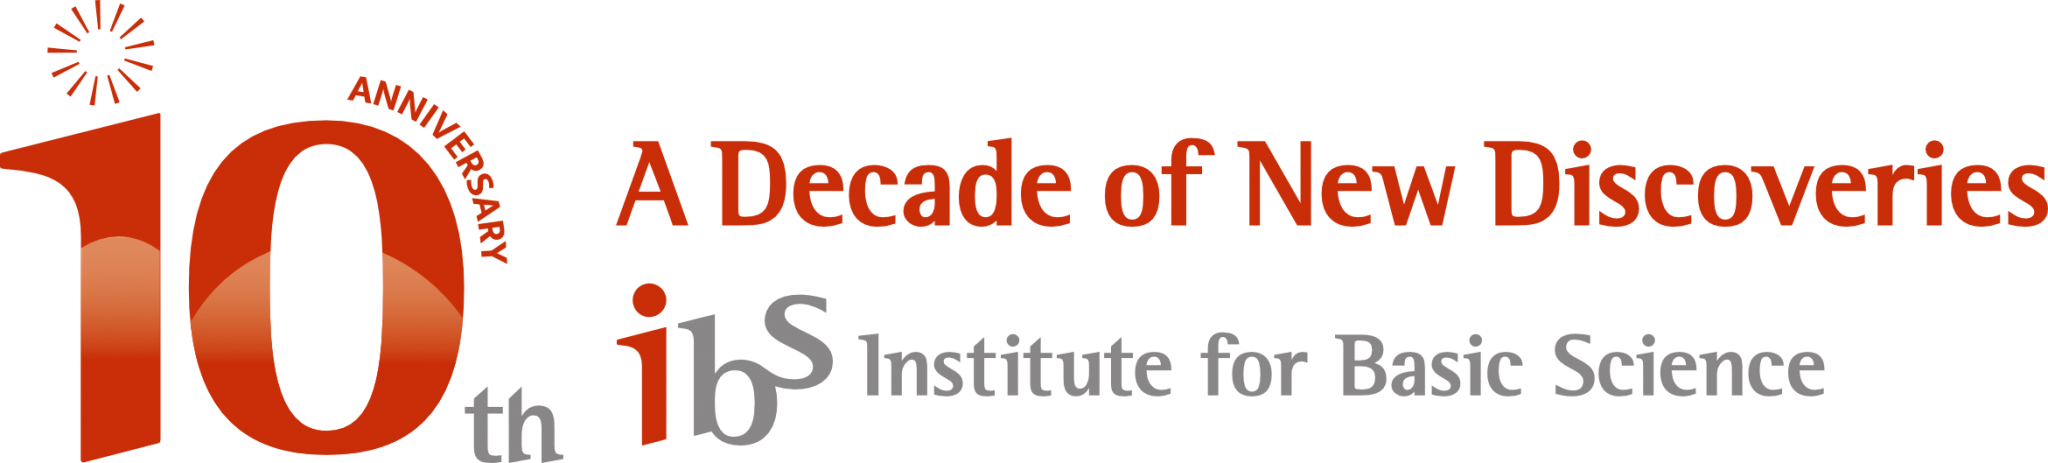 10th A Decade of New Discoverise ibs Institute for Basic Science